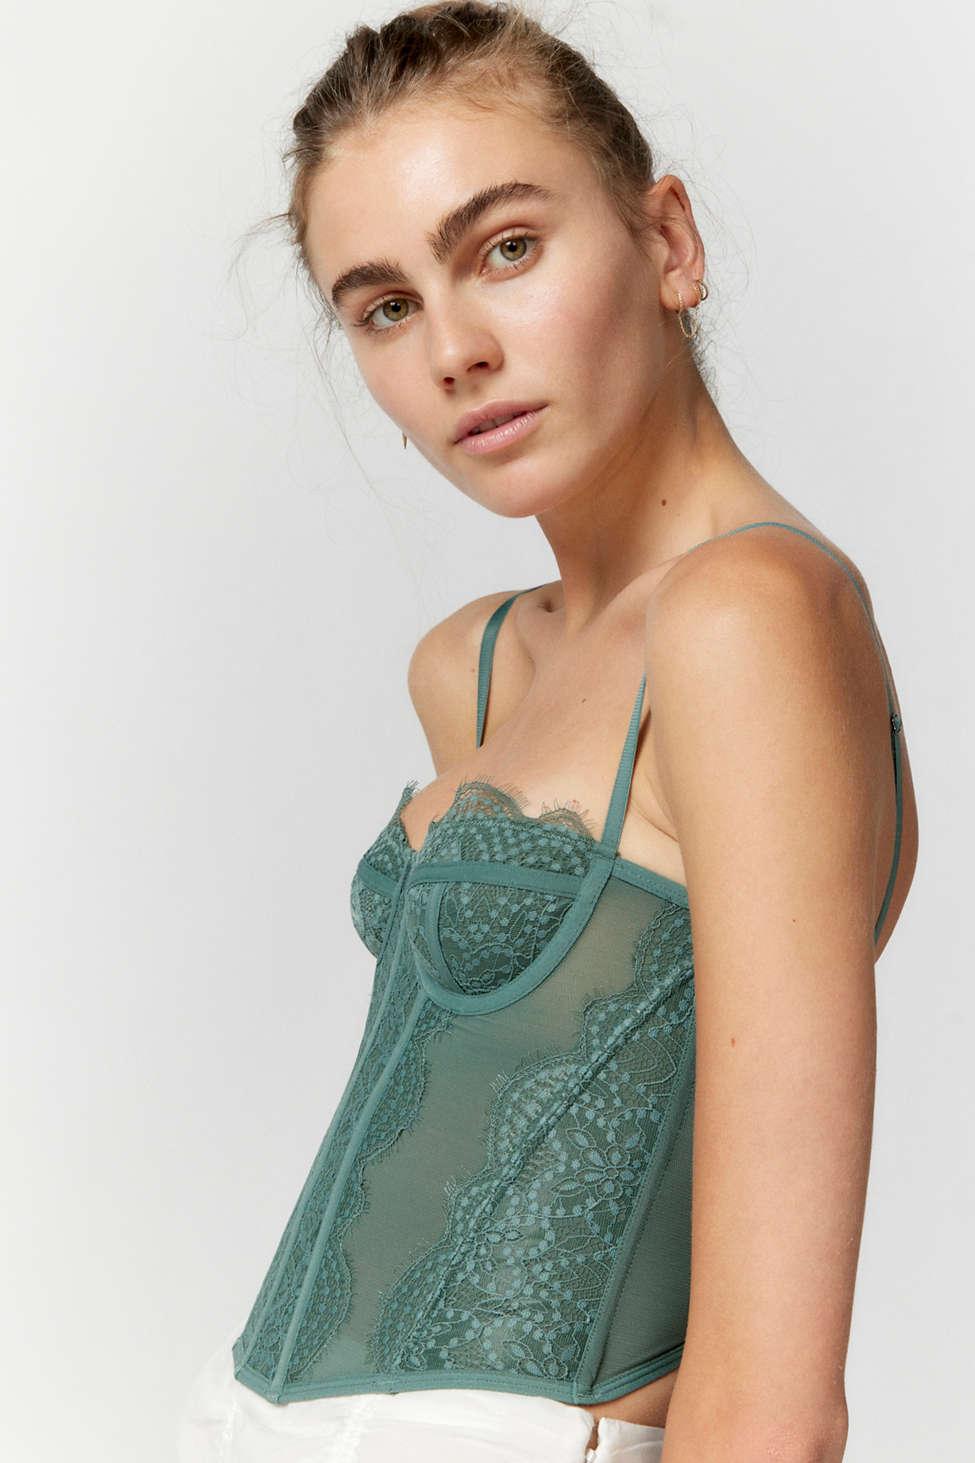 Out From Under Modern Love Lace Corset In Olive Green At Urban